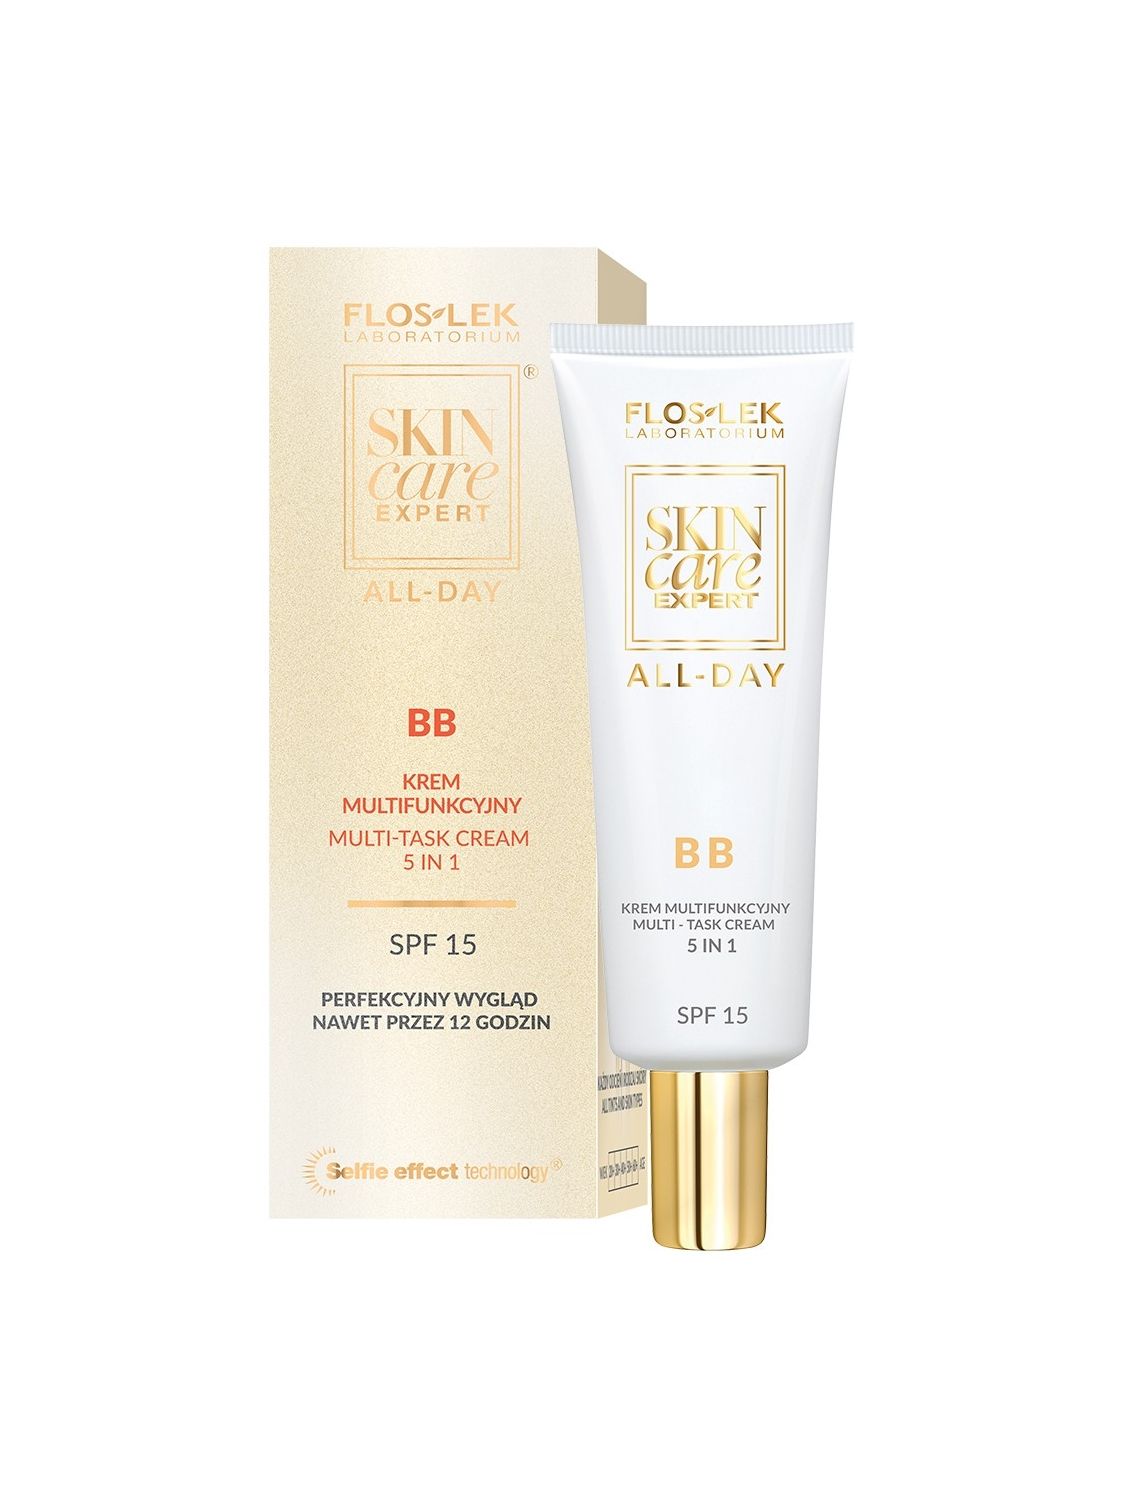 SKIN CARE EXPERT® ALL-DAY BB Multifunktions Creme 5 in 1 SPF 15 - 50 ml - Floslek